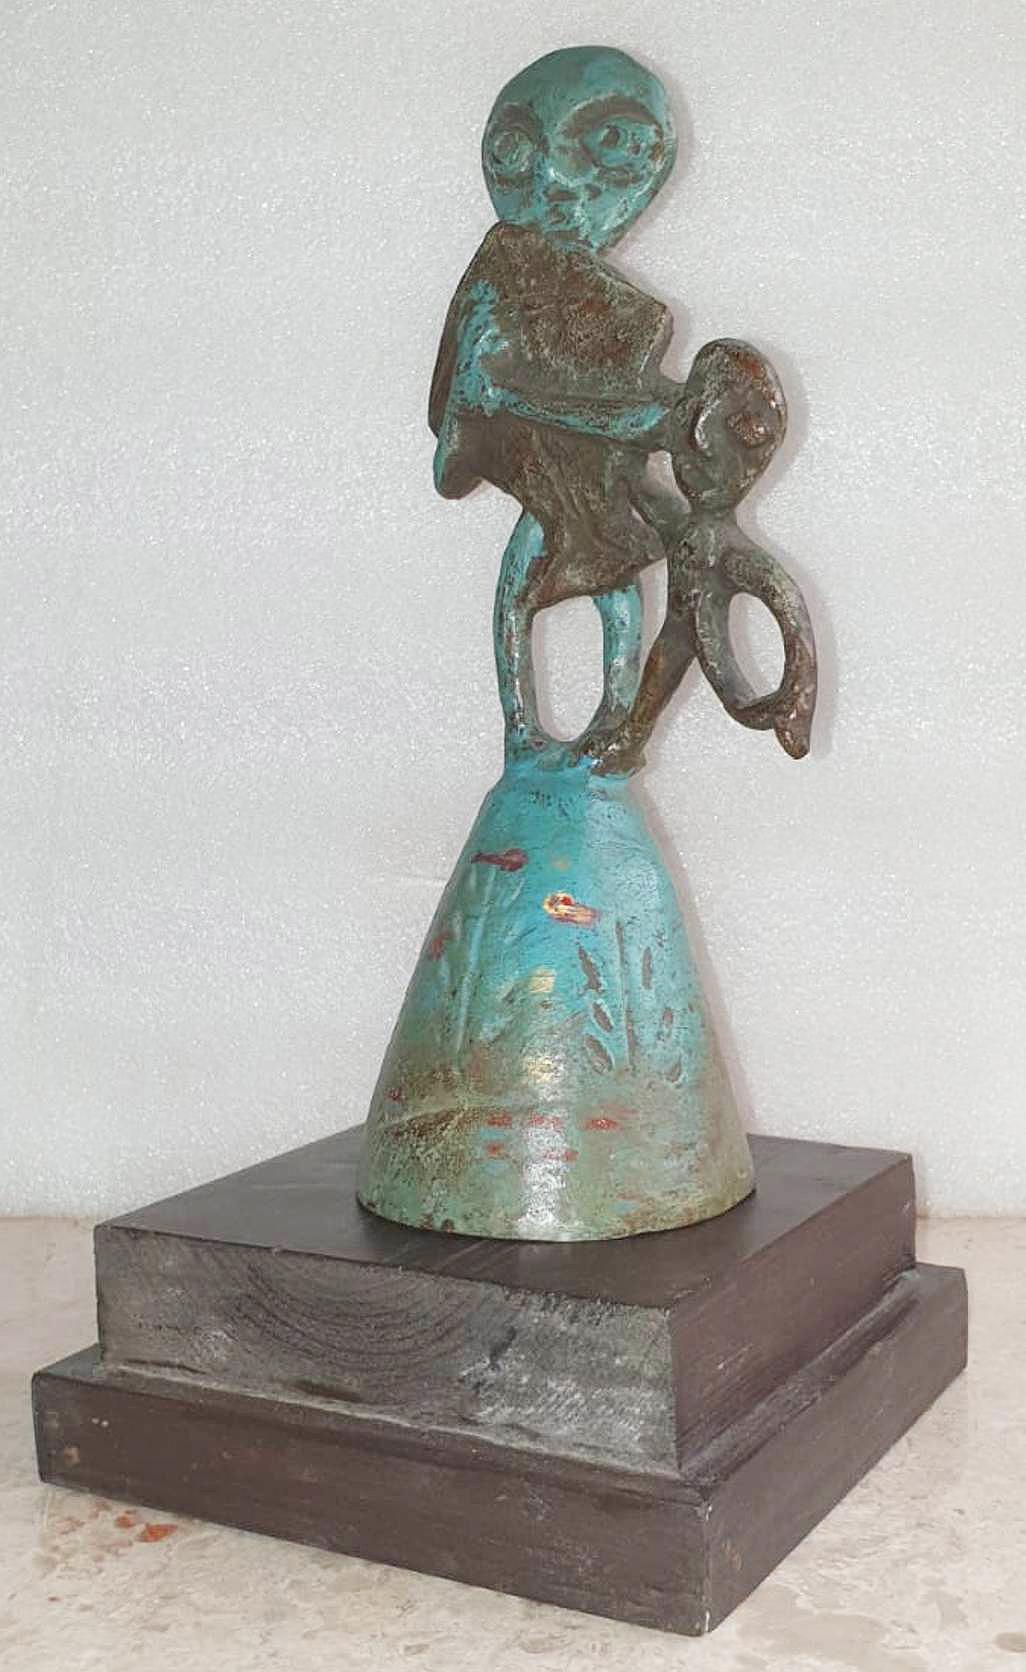 Subrata Biswas - Innocent Life
Bronze, H 9.5 x W 4.5 x D 3.5 inches

Style : The motive of a child in its most basic form appears quite repeatedly in the works of Subrata Biswas. The elementary human form representing the child complements